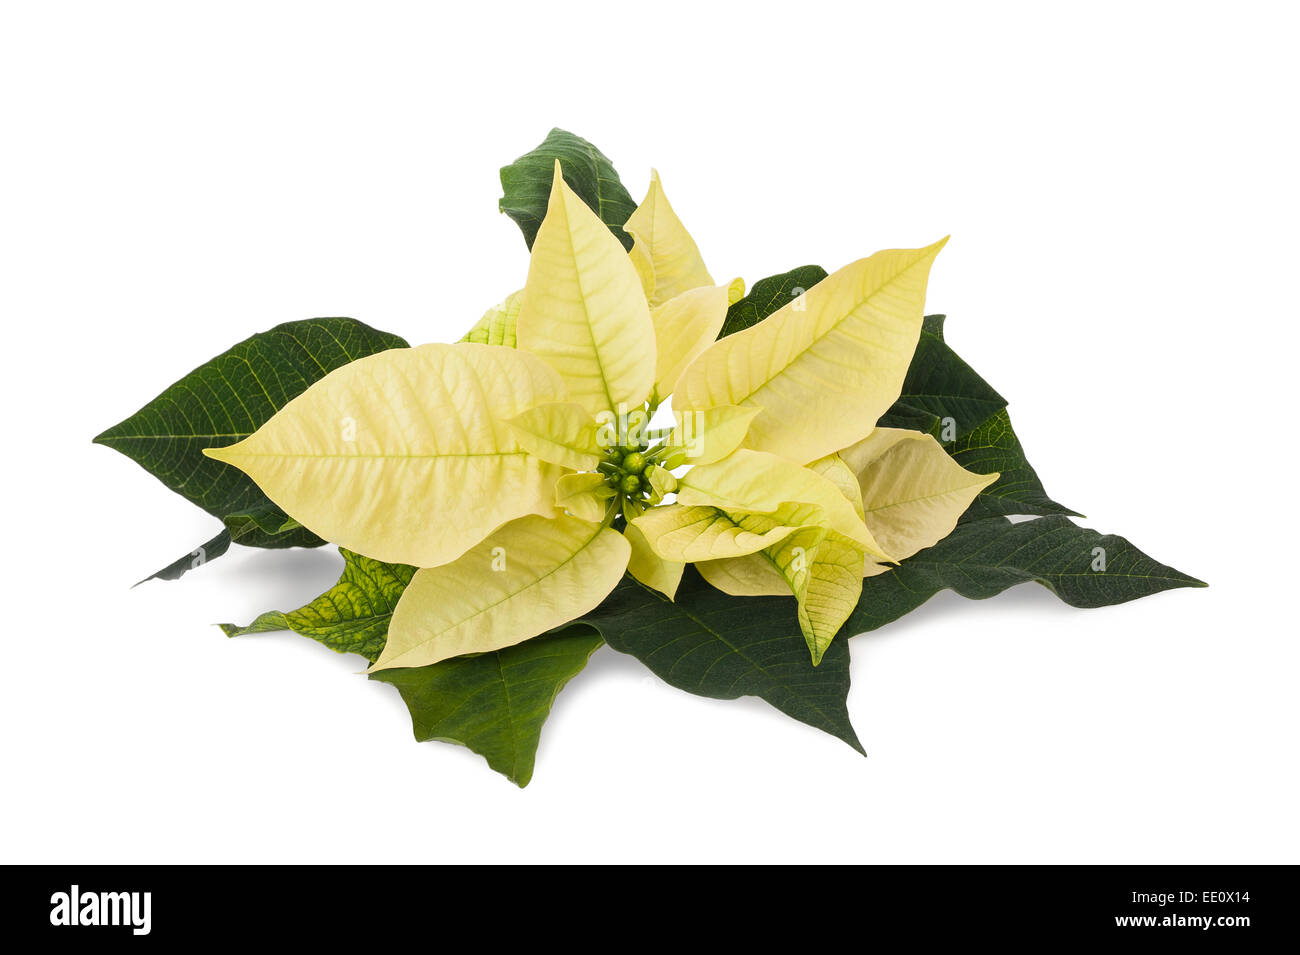 yellow poinsettia flower (christmas star) isolated on a white background Stock Photo